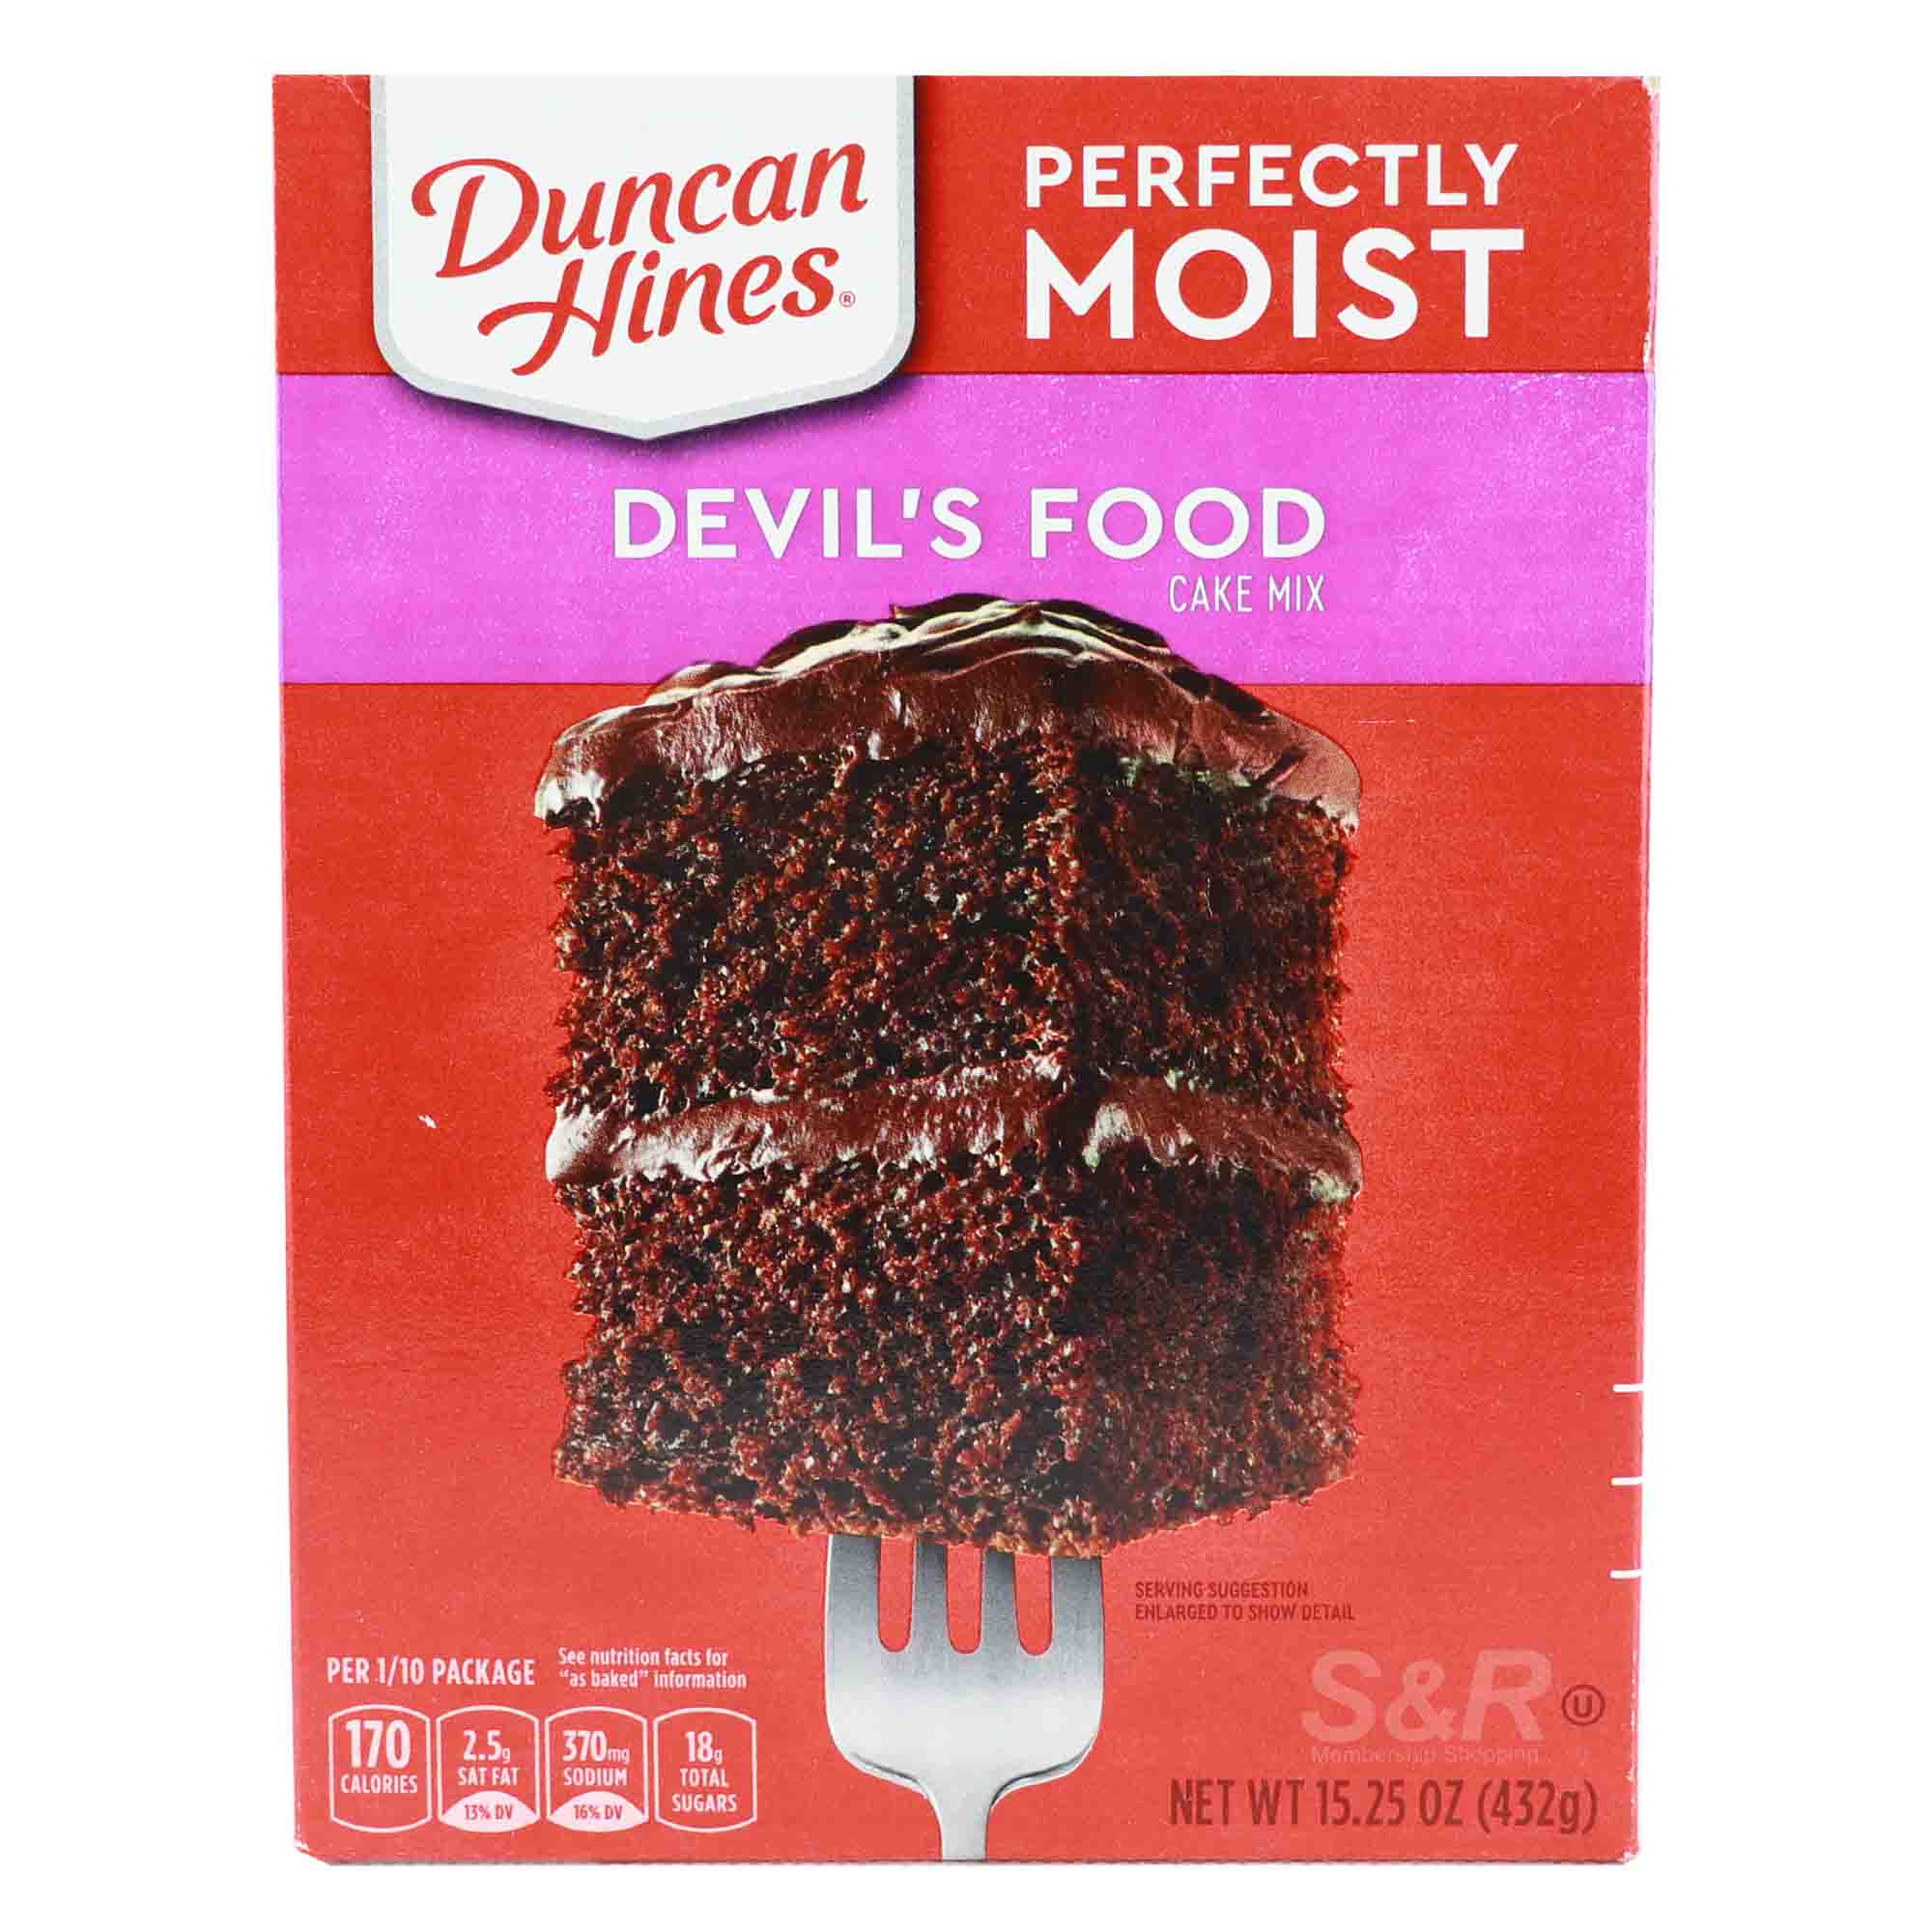 Duncan Hines Perfectly Moist Devil's Food Cake Mix 432g